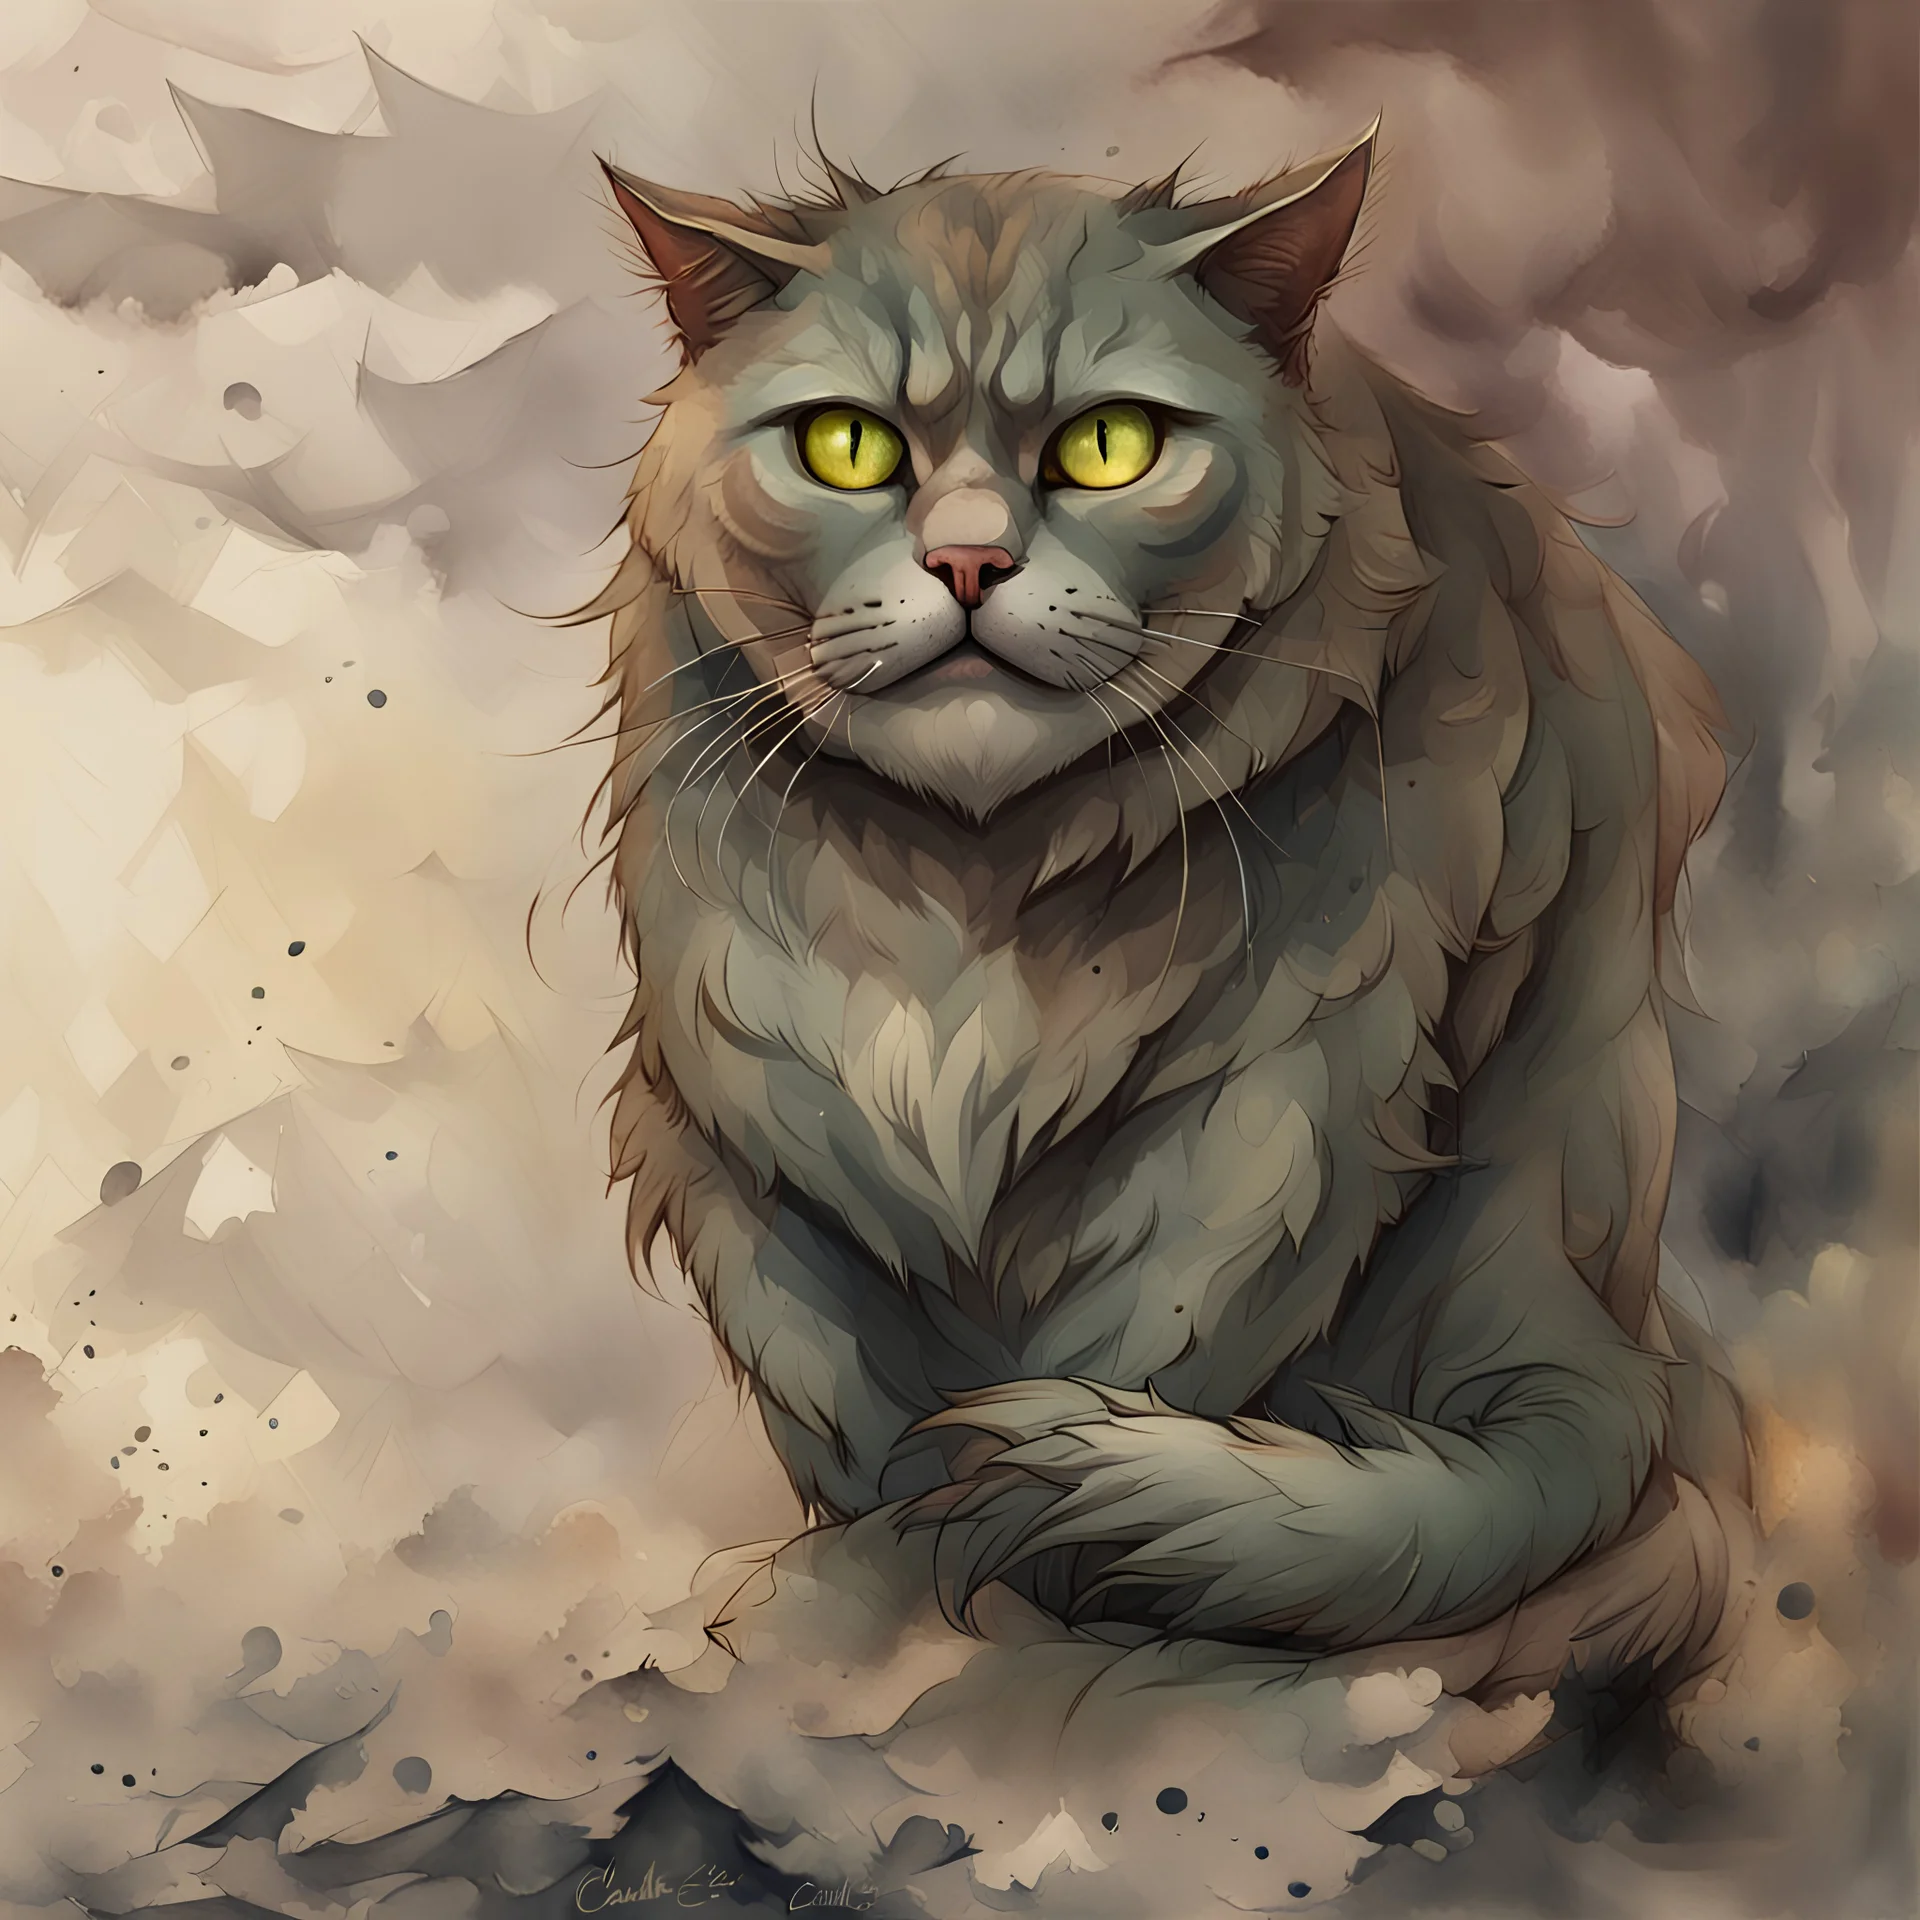 watercolor Russian big man-eating cat, Bayun cat on a white background, Trending on Artstation, {creative commons}, fanart, AIart, {Woolitize}, by Charlie Bowater, Illustration, Color Grading, Filmic, Nikon D750, Brenizer Method, Perspective, Depth of Field, Field of View, F/2.8, Lens Flare, Tonal Colors, 8K, Full-HD, ProPhoto RGB, Perfectionism, Rim Lighting, Natural Lighting, Soft Lighting, Accent Lighting, Diffraction Grading, With